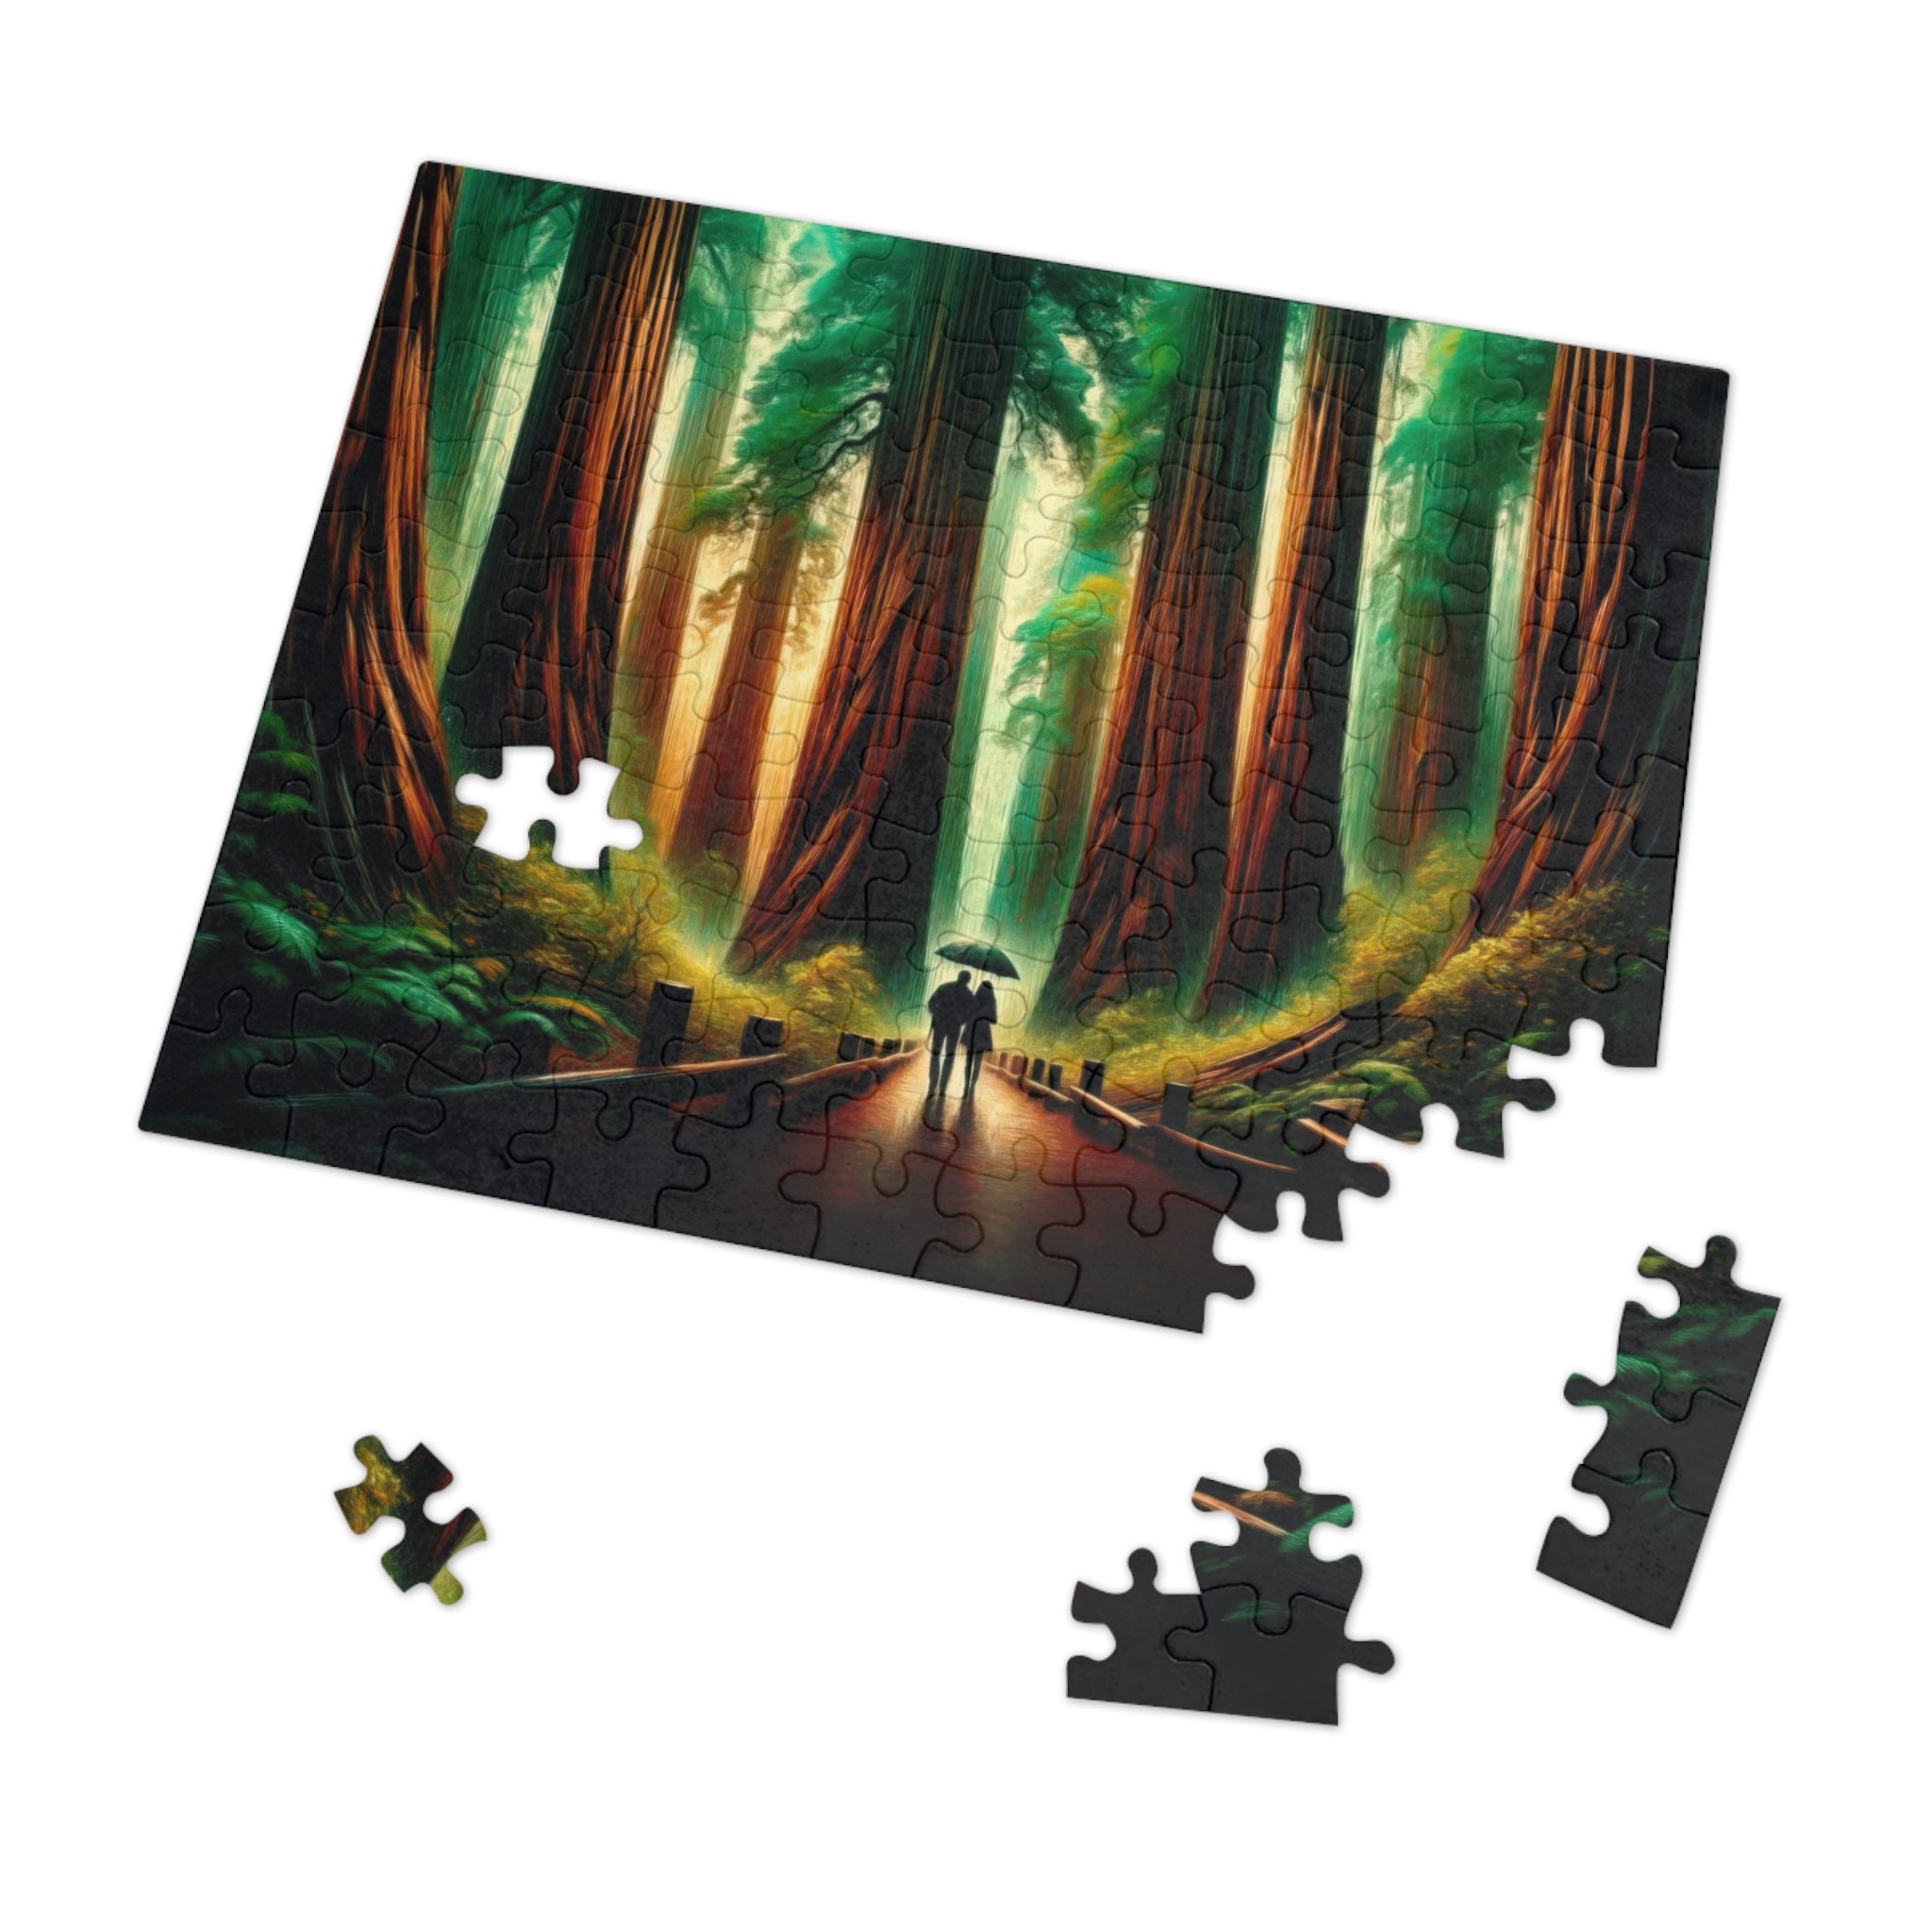 Under the Redwood Canopy Puzzle